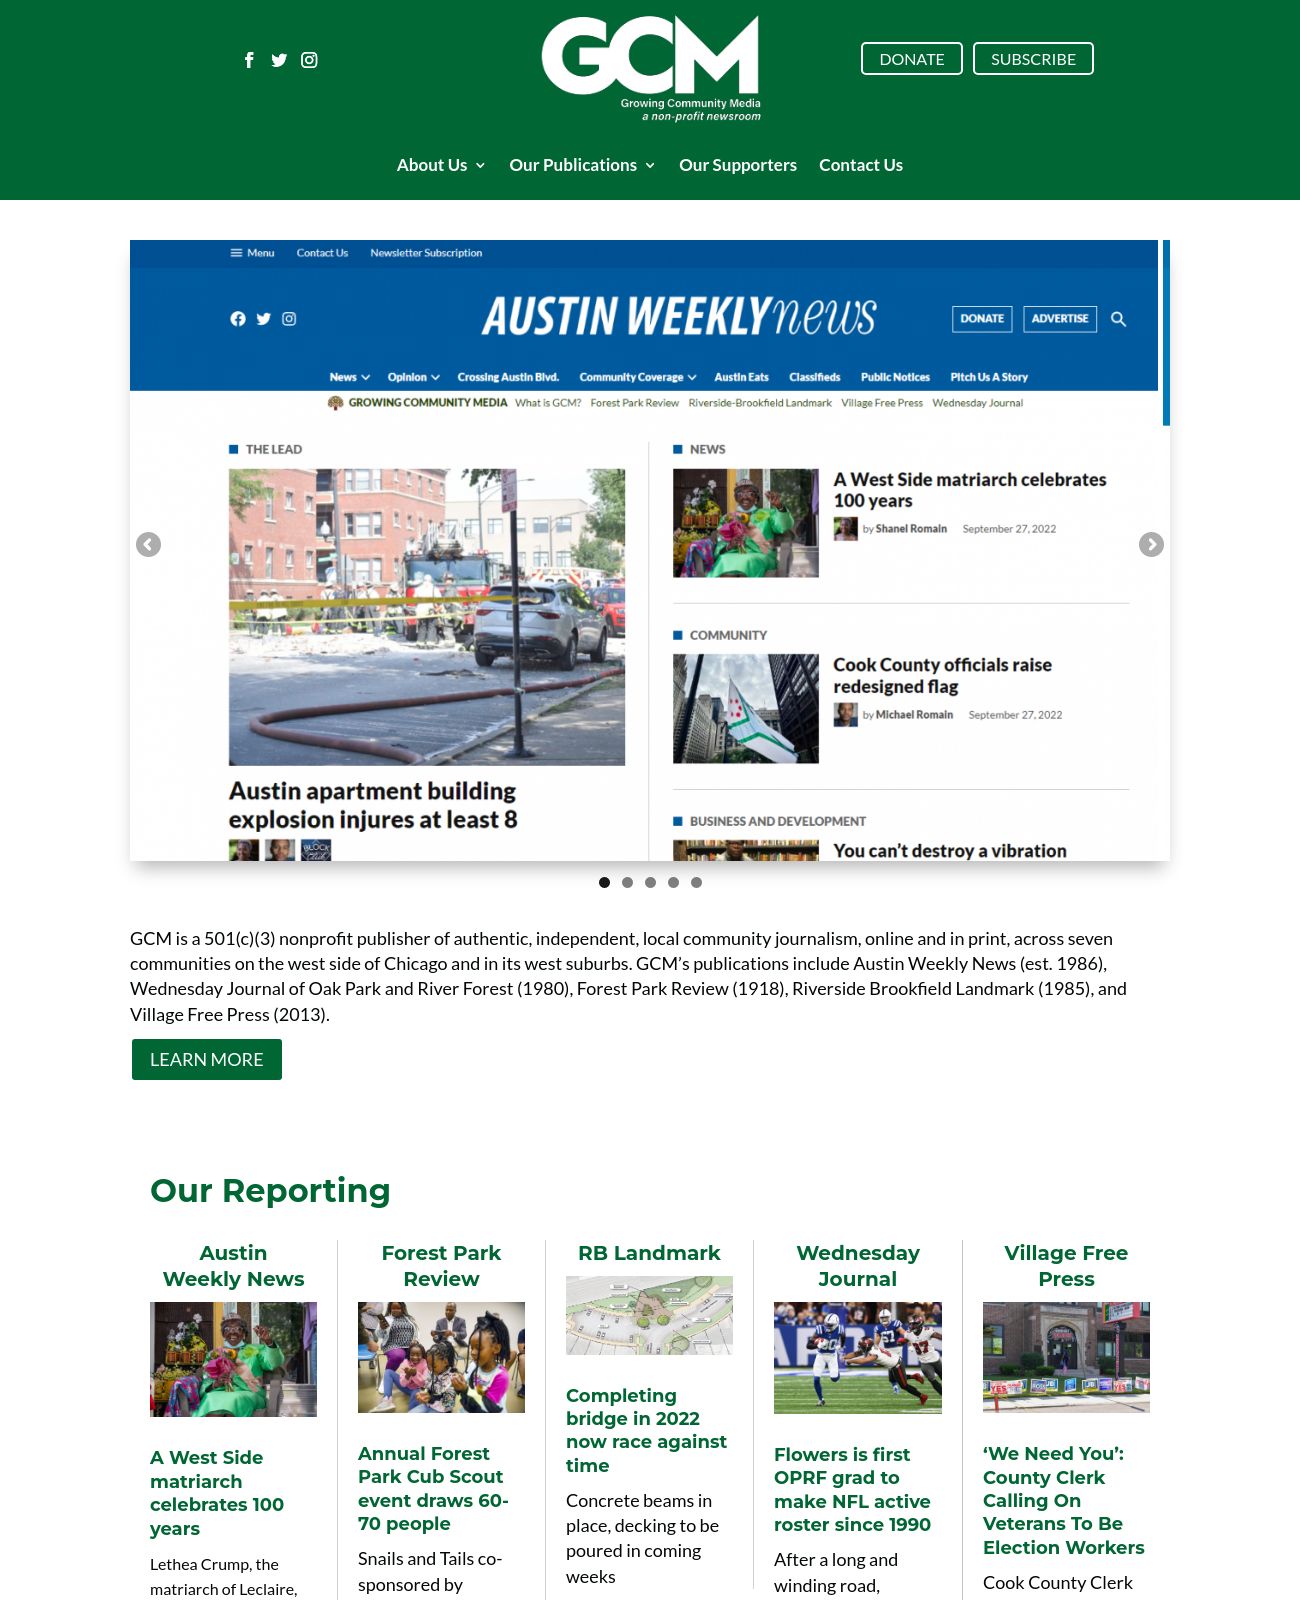 Austin Weekly News at 2022-10-03 07:03:30-05:00 local time